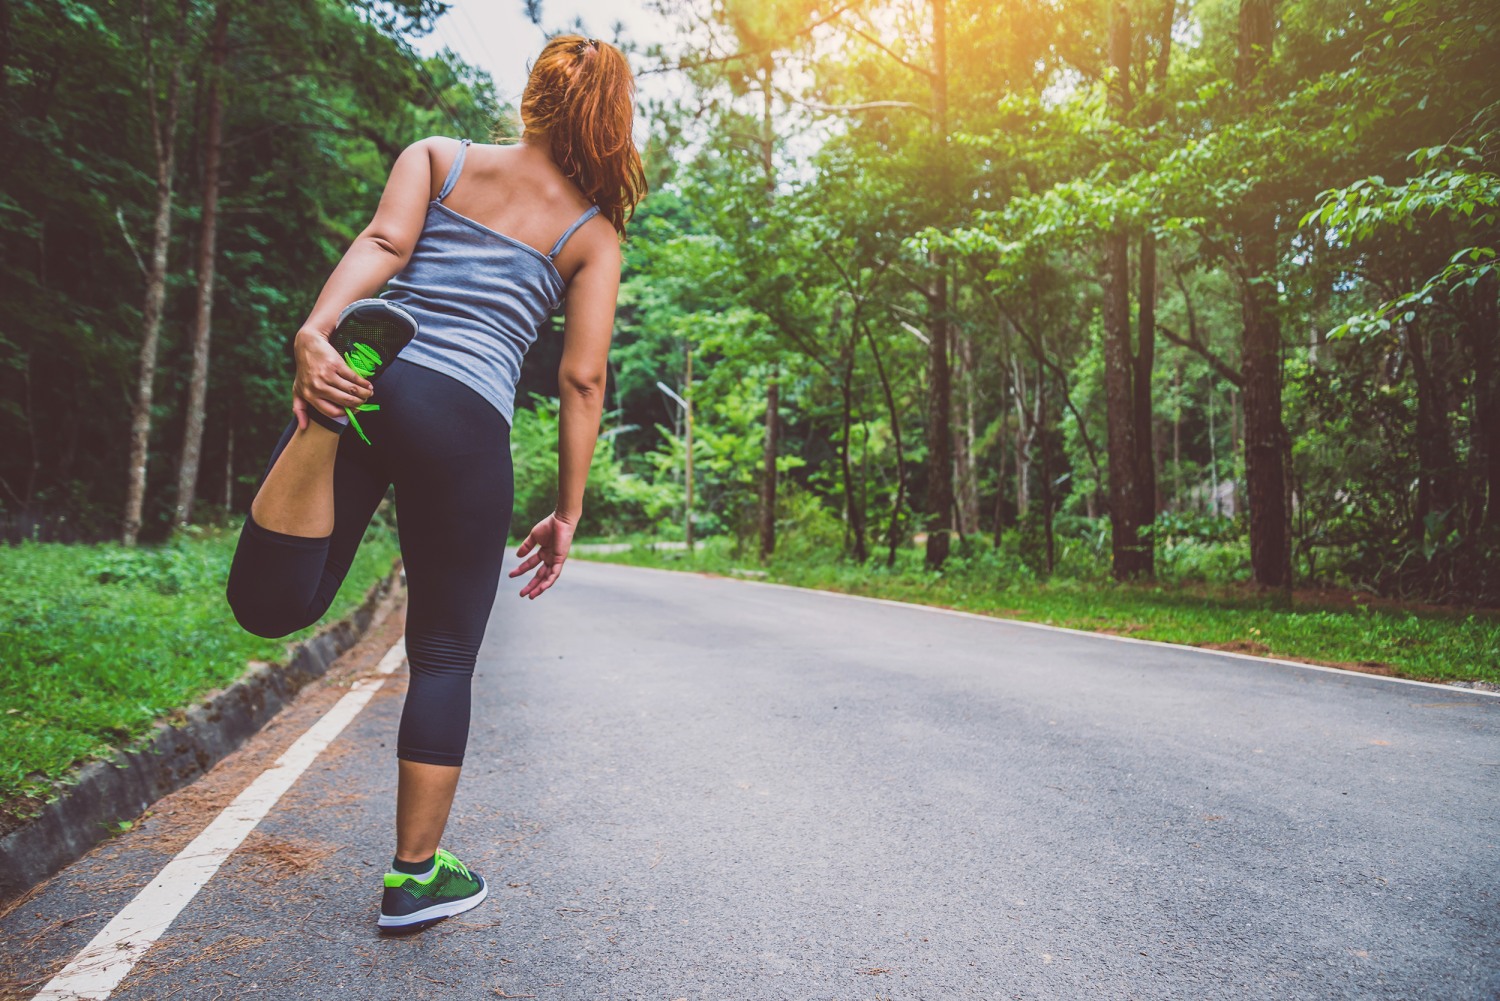 7 Quick Workouts To Do In The Morning When You're Short On Time